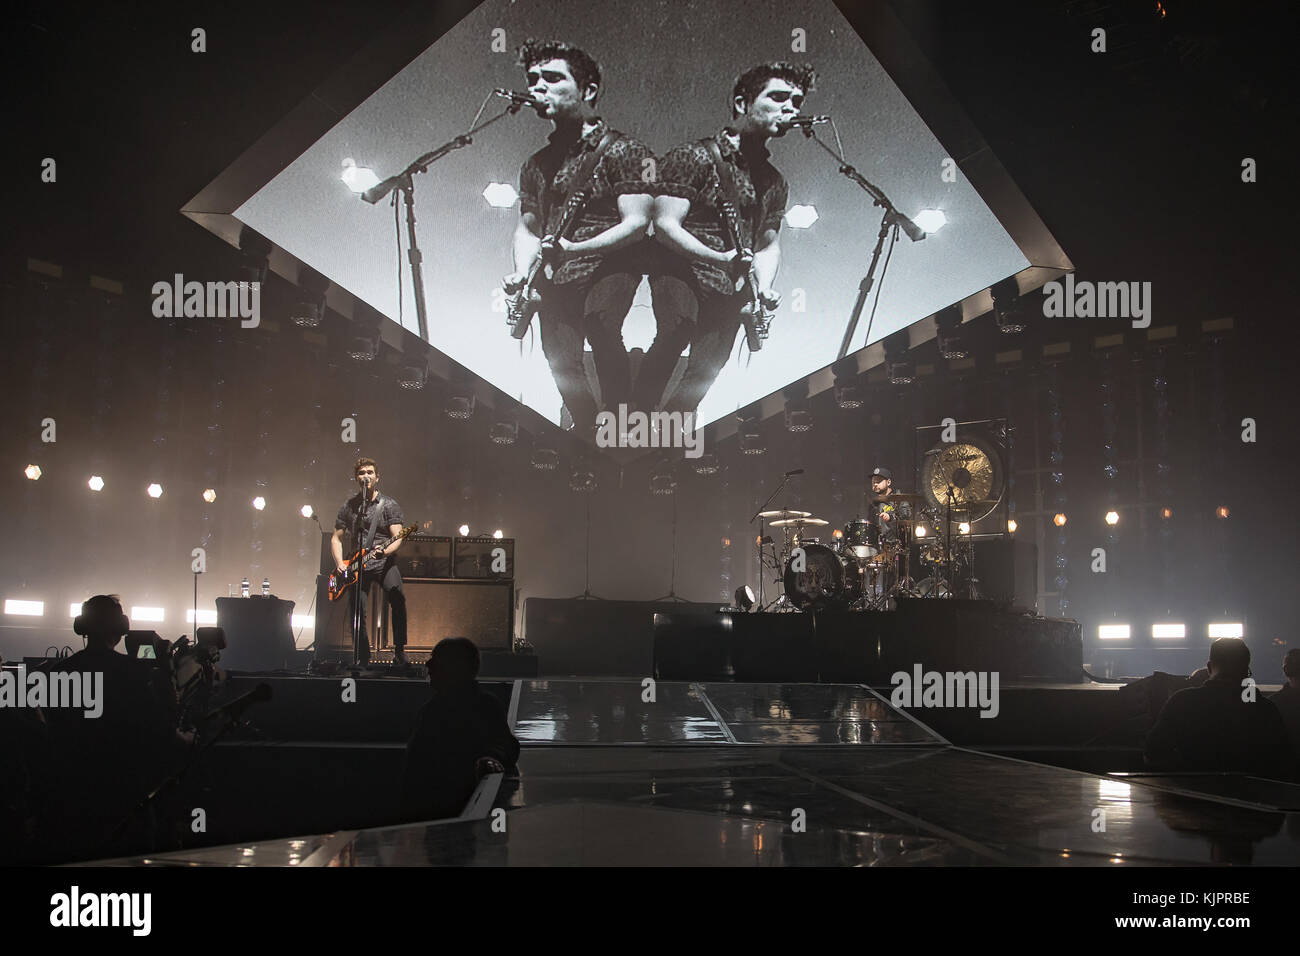 Brighton, UK. 29th Nov, 2017. Royal Blood performing the final night of a sellout hometown show at The Brighton Centre, England. Credit: Jason Richardson/Alamy Live News Stock Photo